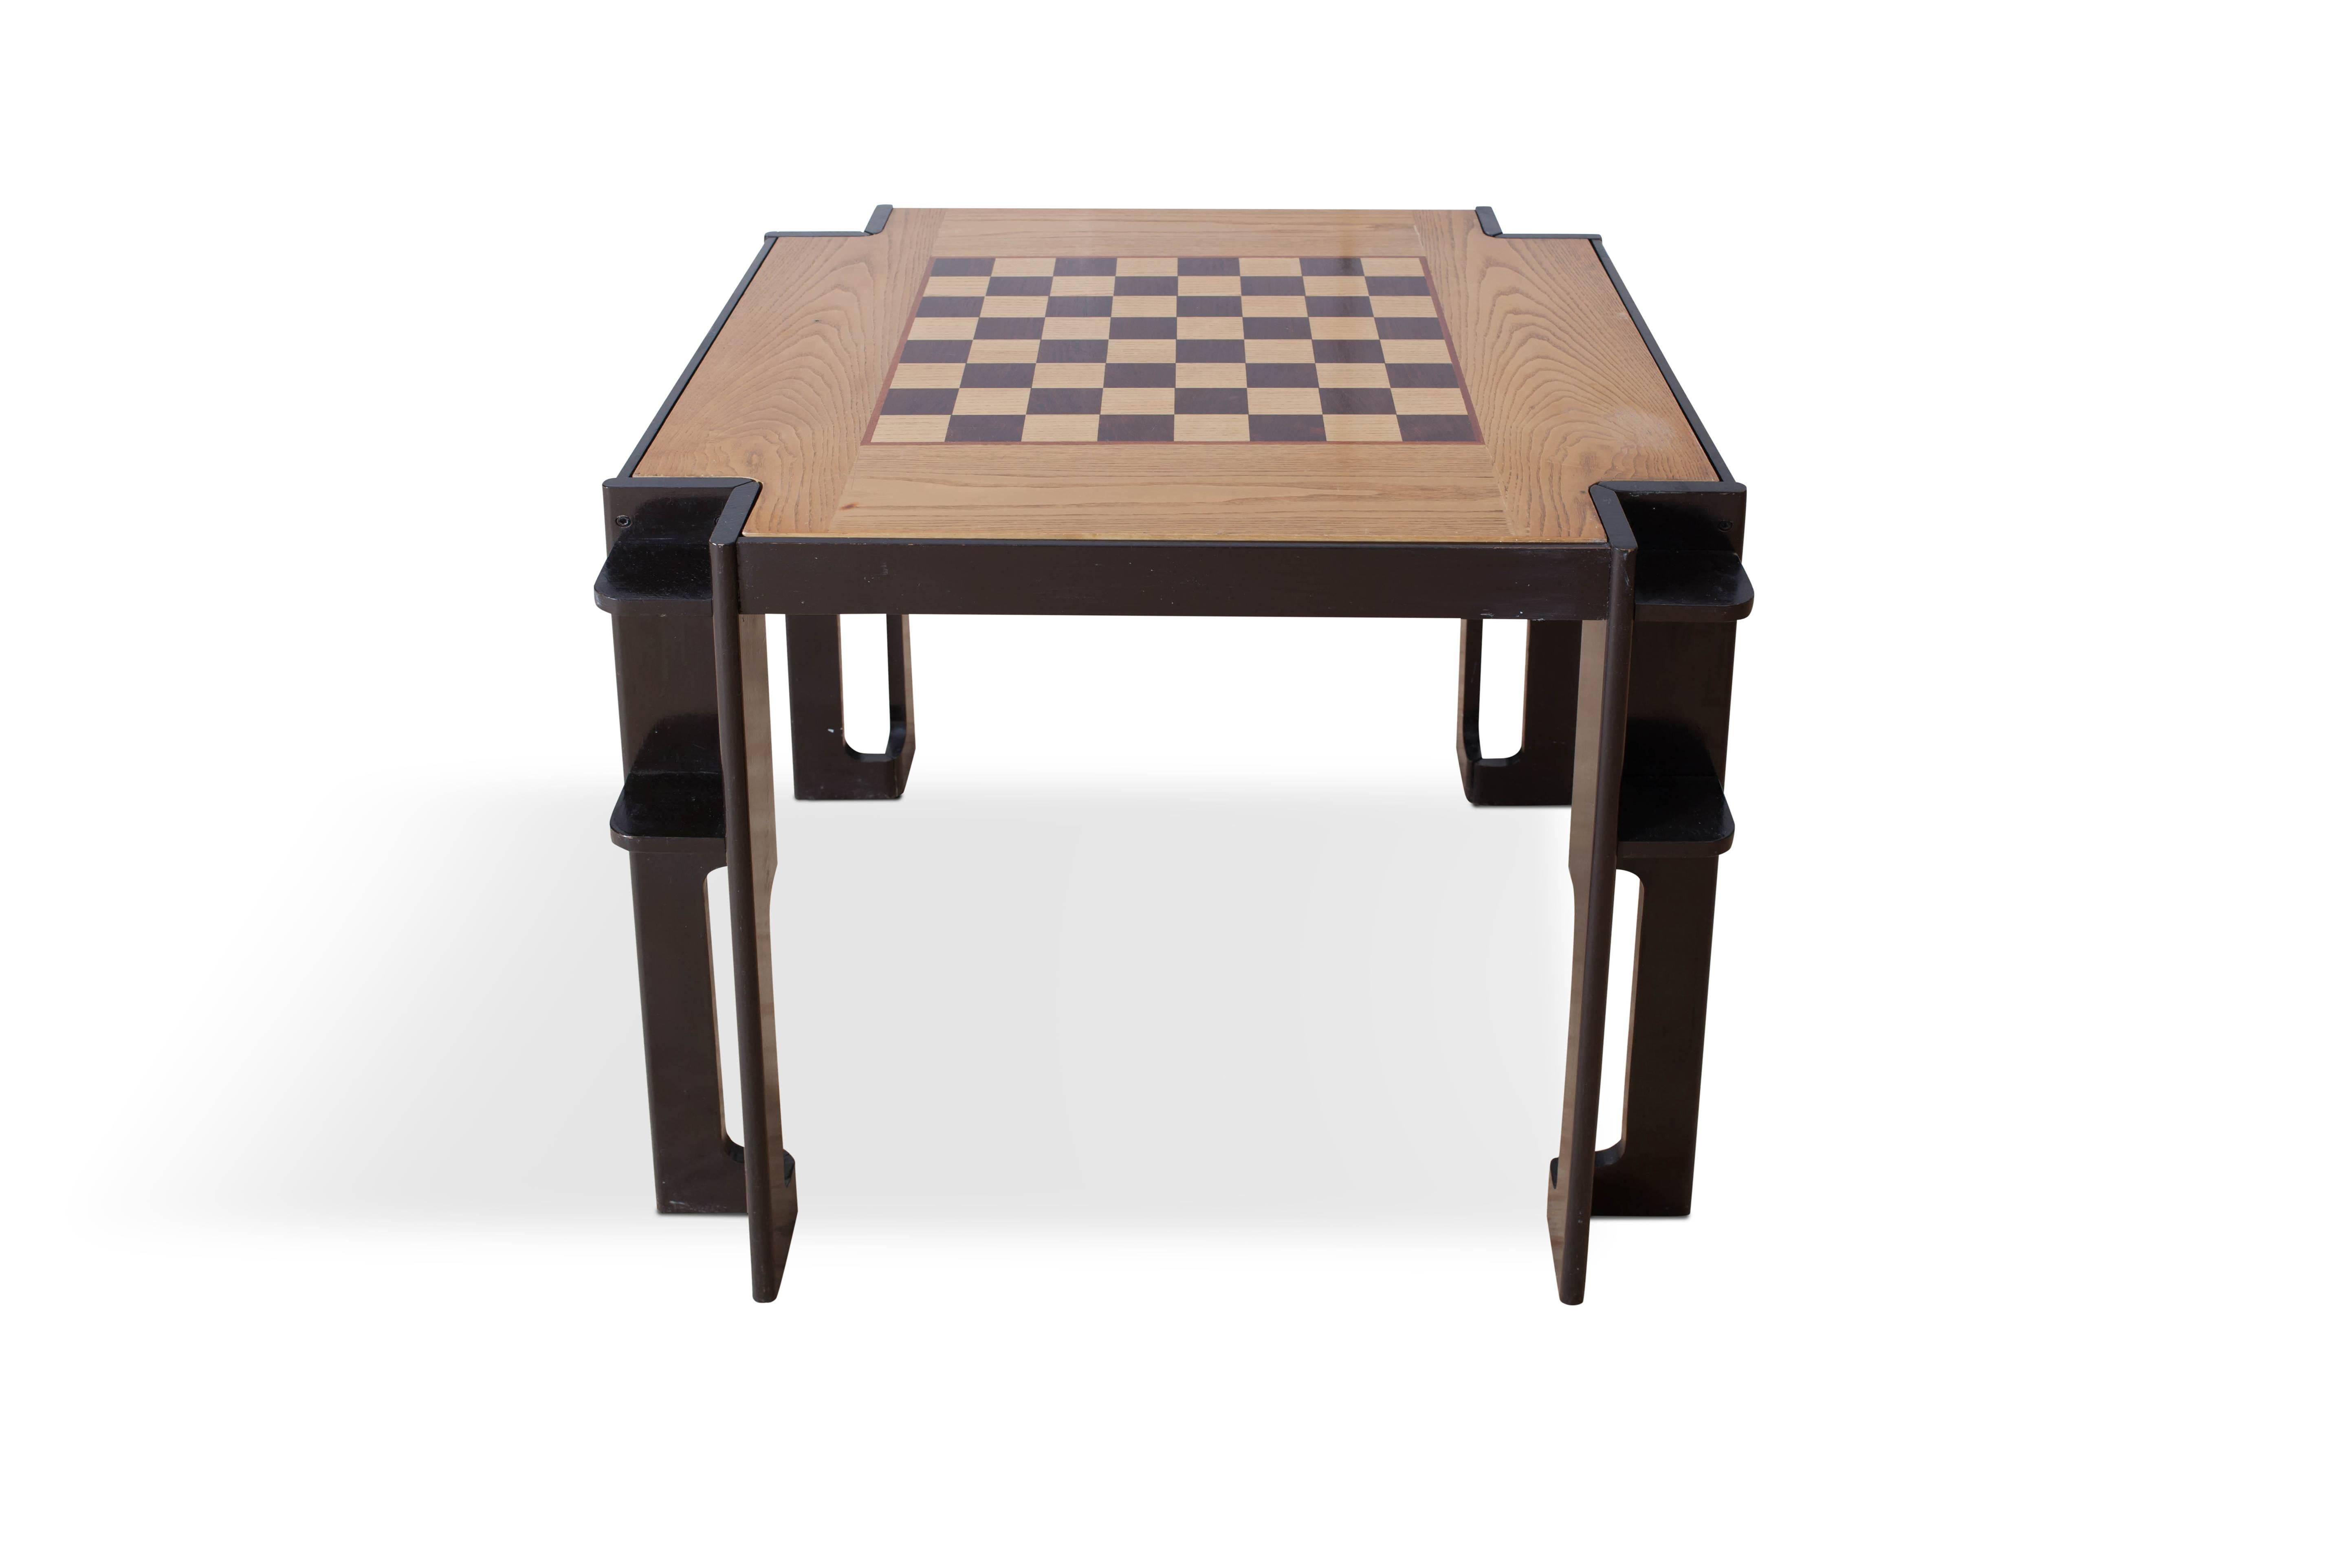 Square Italian modernist gaming table with a adjustable tabletop. 
One side is provided with a chess board, the other with green felt, perfect for card games and such.

The modern looking table legs are provided with two little shelves, perfect